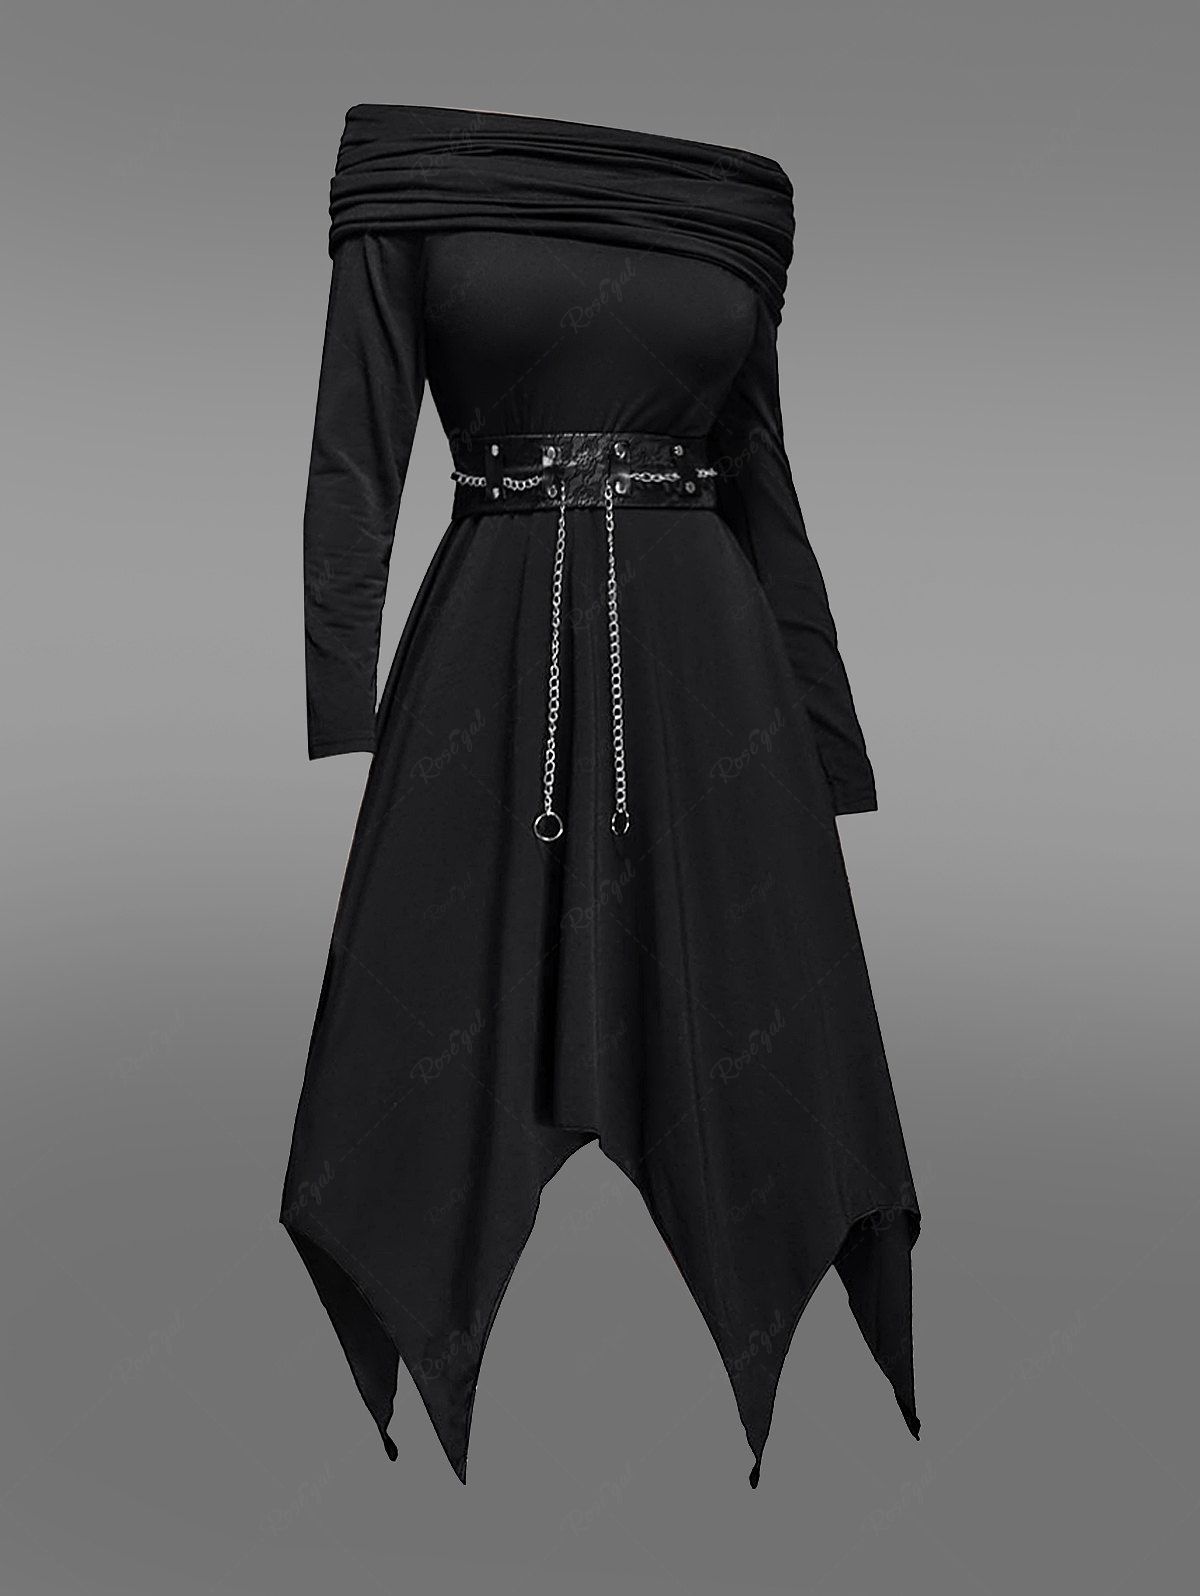 💗Danae_lovecraft Loves💗 Gothic Floral Lace Chain Belt Asymmetric Ruched Hooded Dress